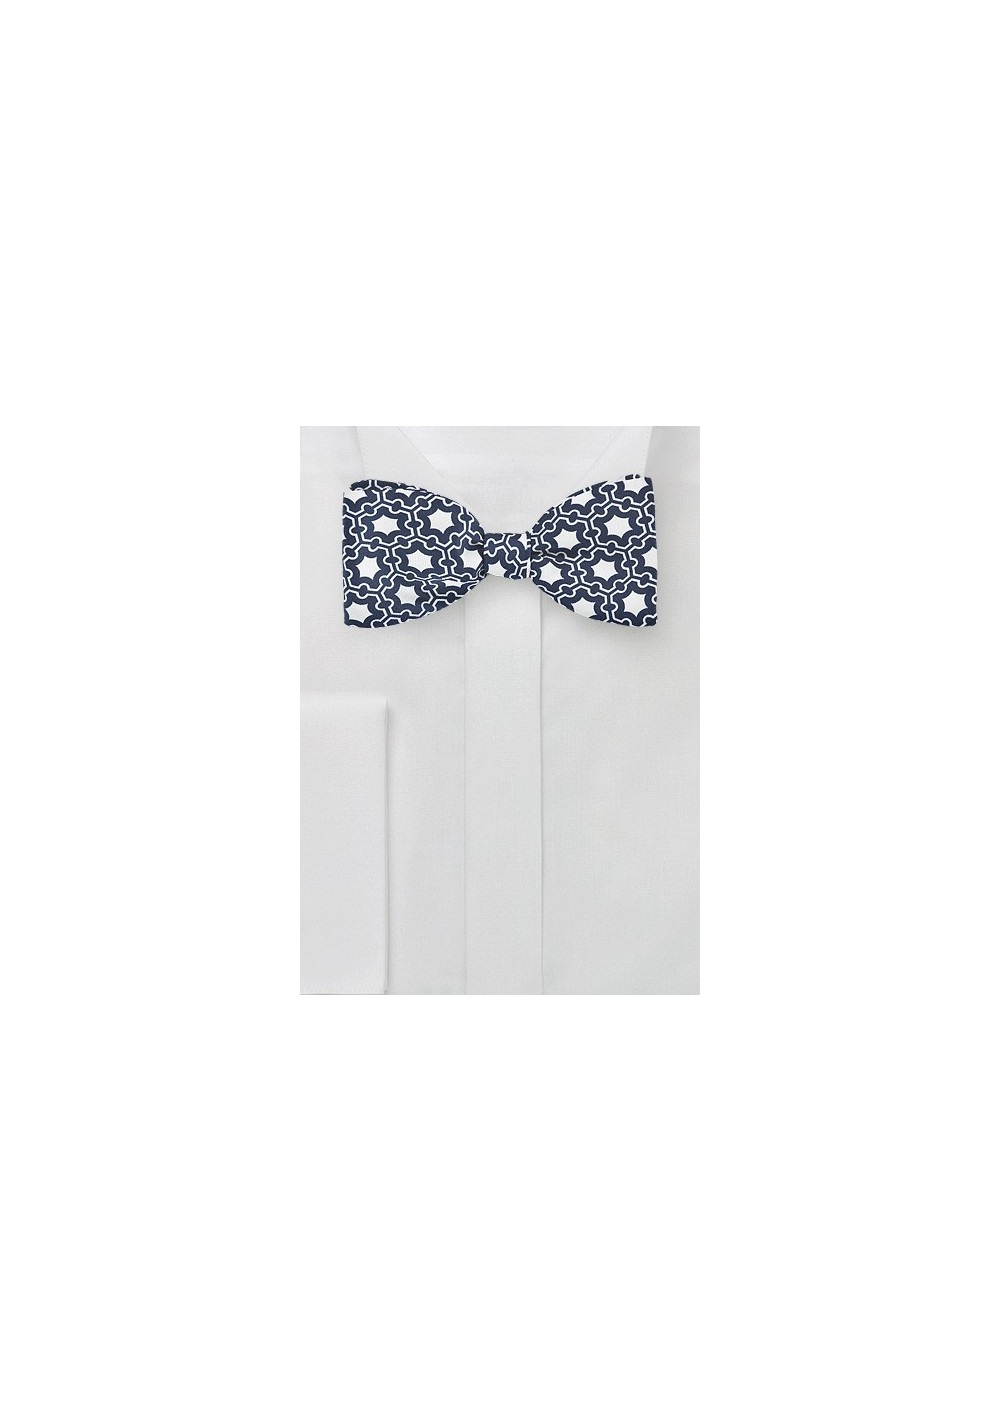 Modern Moroccan Print Bow Tie in Blue and White